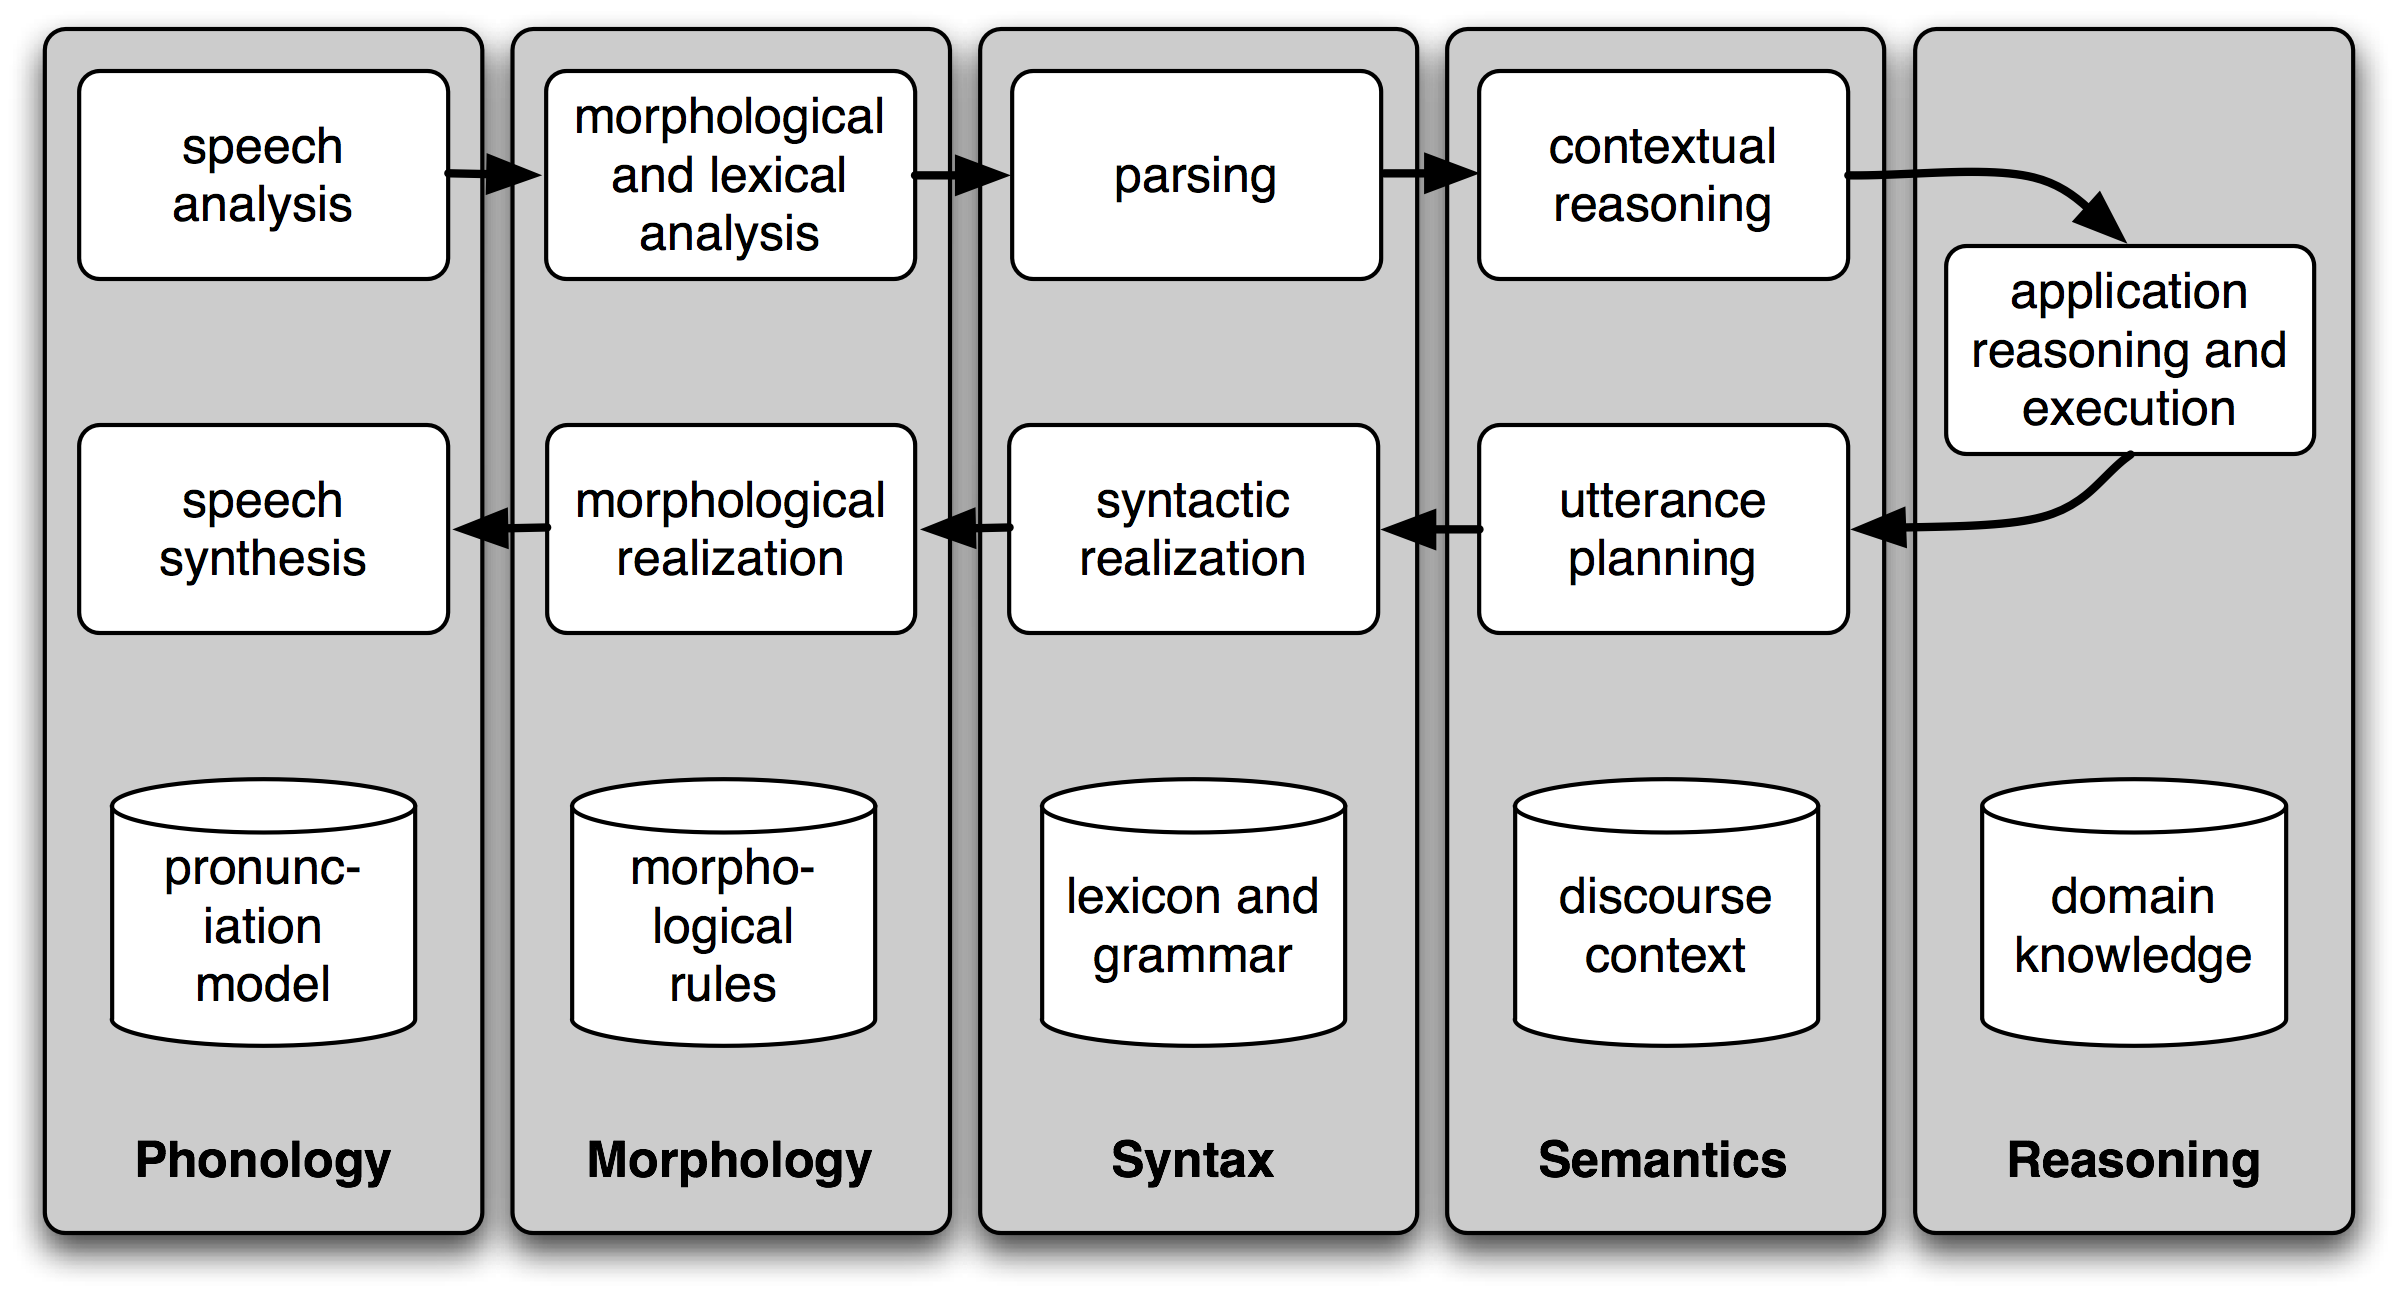 Simple Pipeline Architecture for a Spoken Dialogue System: Spoken input (top left) is analyzed, words are recognized, sentences are parsed and interpreted in context, application-specific actions take place (top right); a response is planned, realized as a syntactic structure, then to suitably inflected words, and finally to spoken output; different types of linguistic knowledge inform each stage of the process.